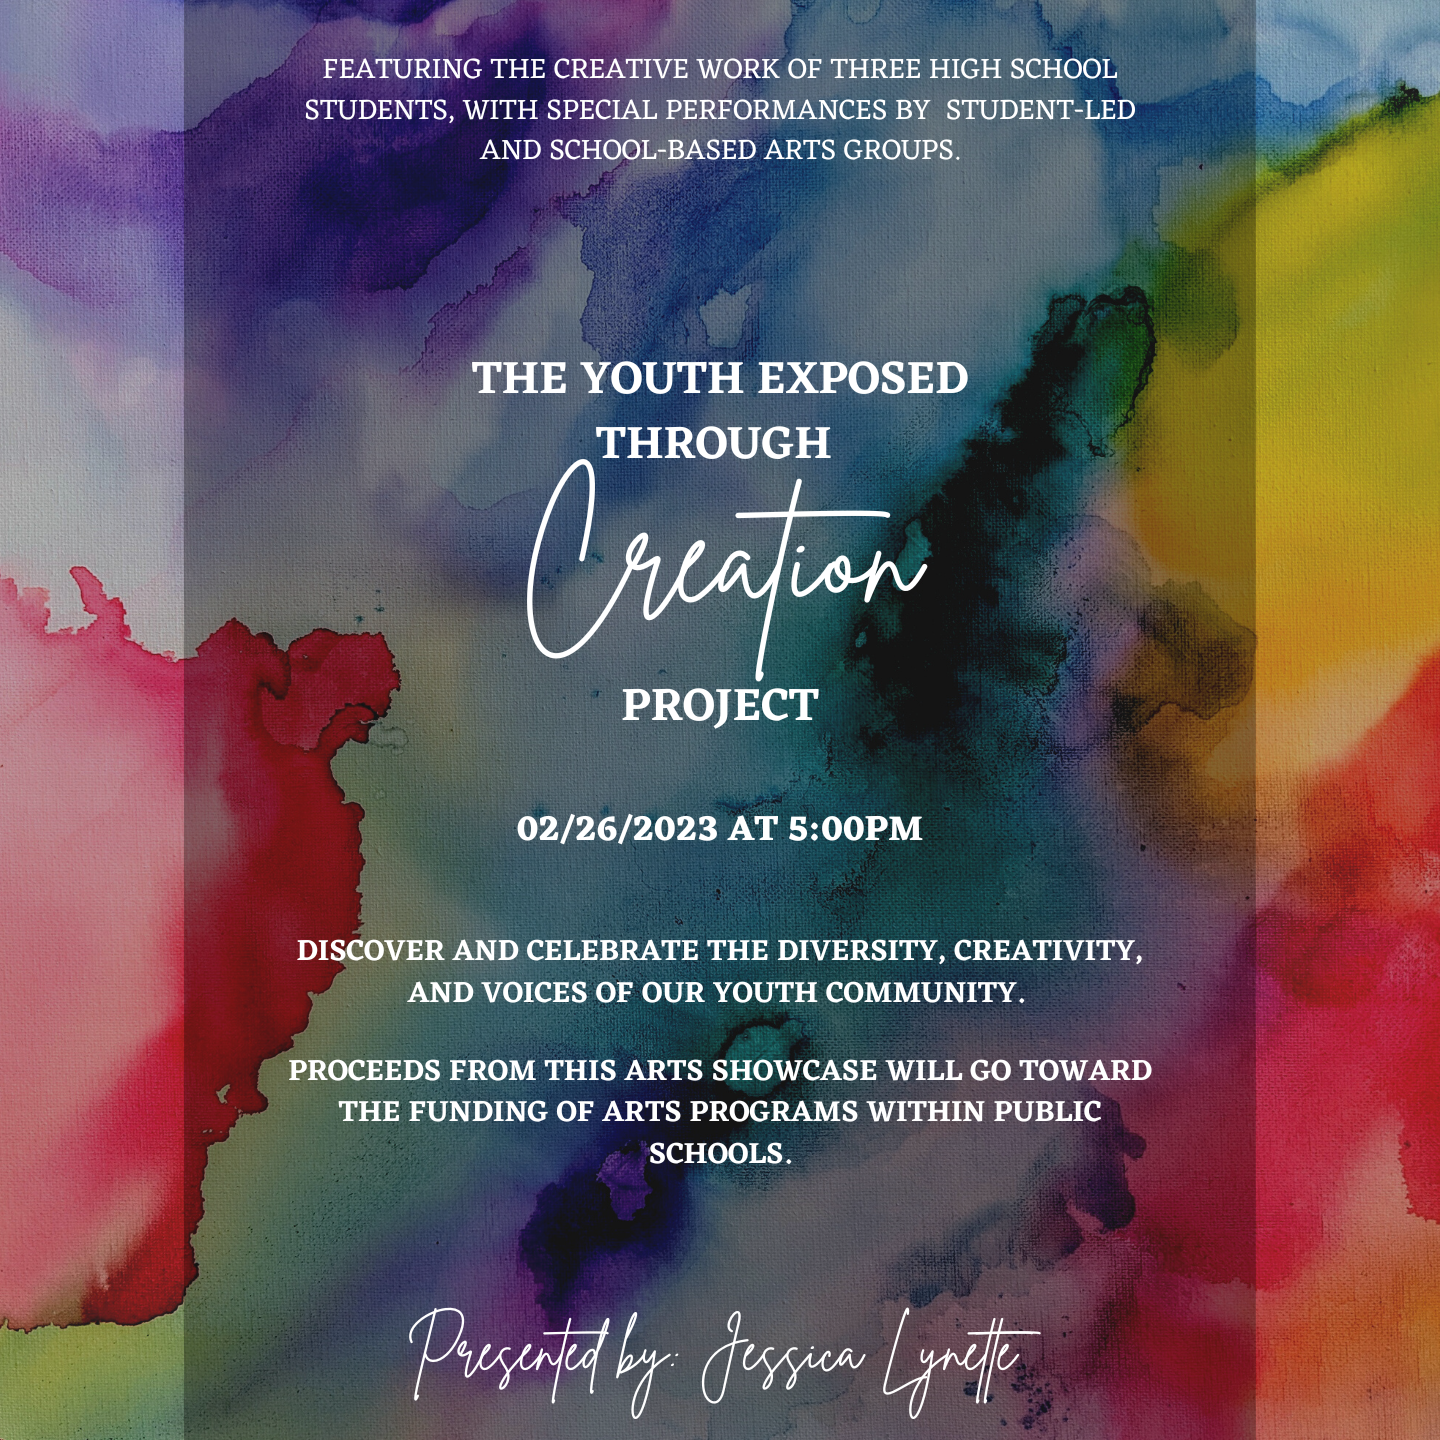 The Youth Exposed Through Creation Project